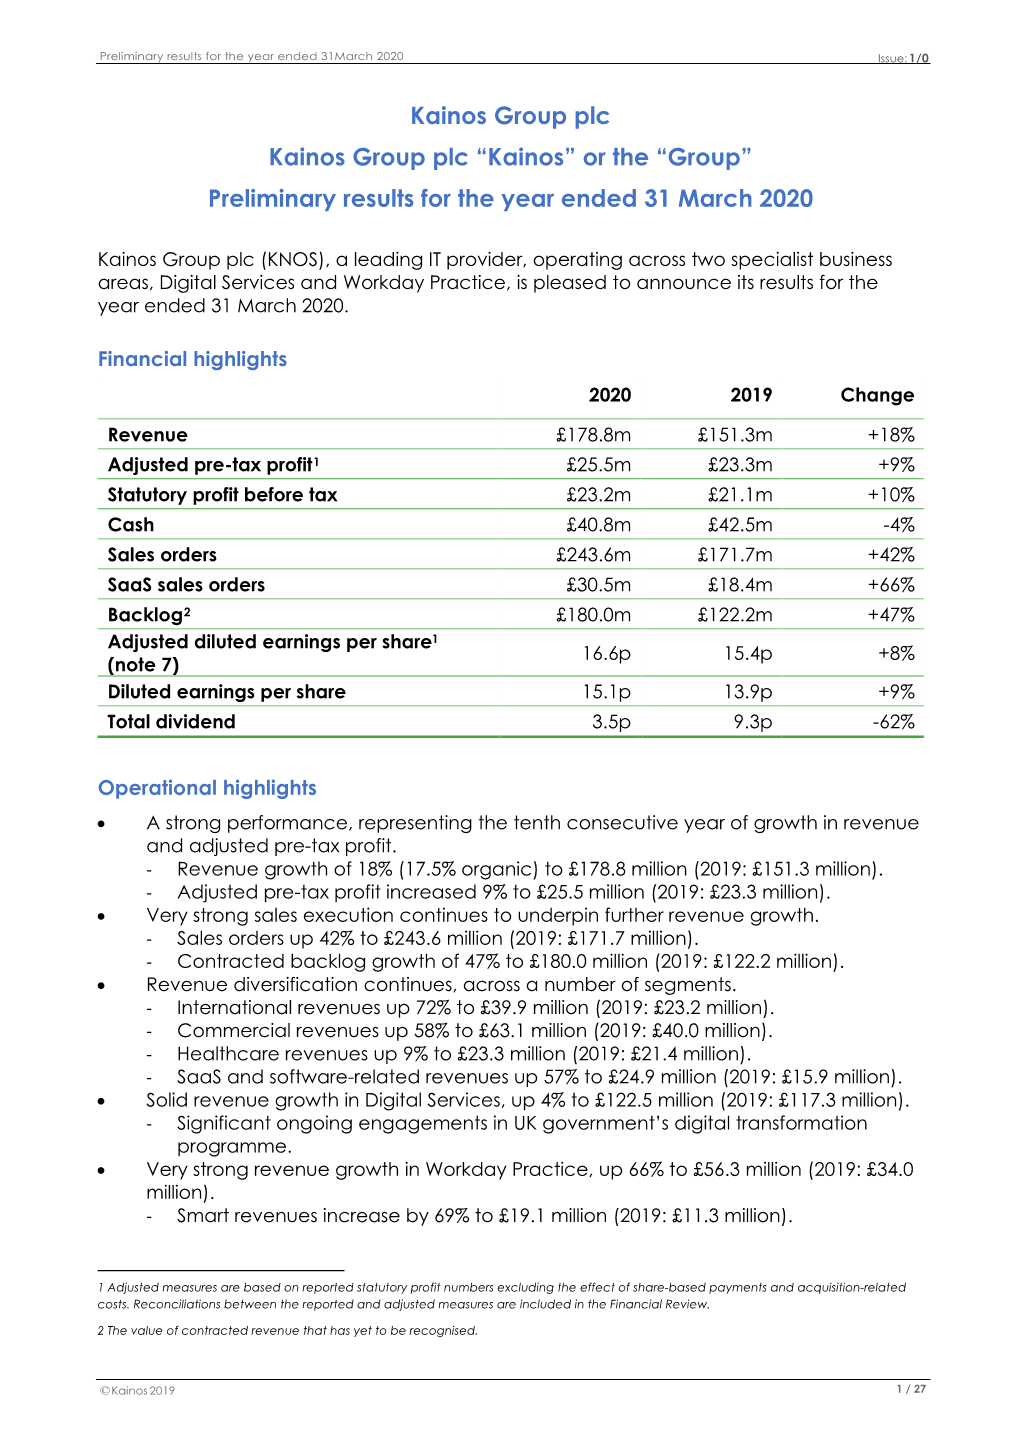 Kainos Group Plc Kainos Group Plc “Kainos” Or the “Group” Preliminary Results for the Year Ended 31 March 2020